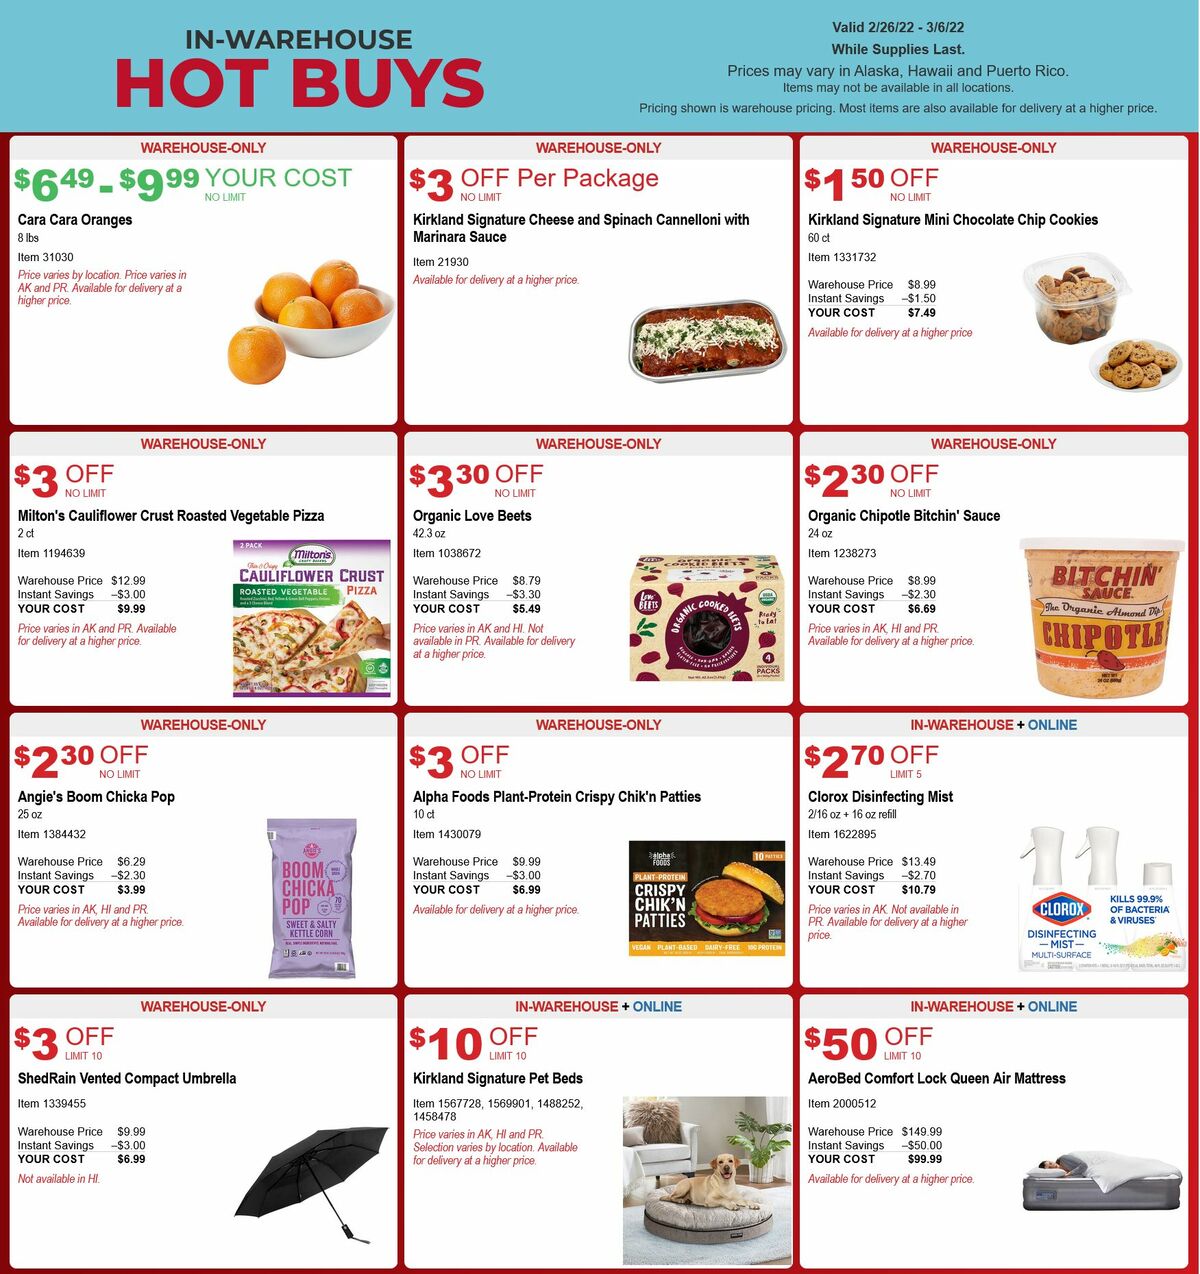 Costco Hot Buys Special Buys and Warehouse Savings from February 26